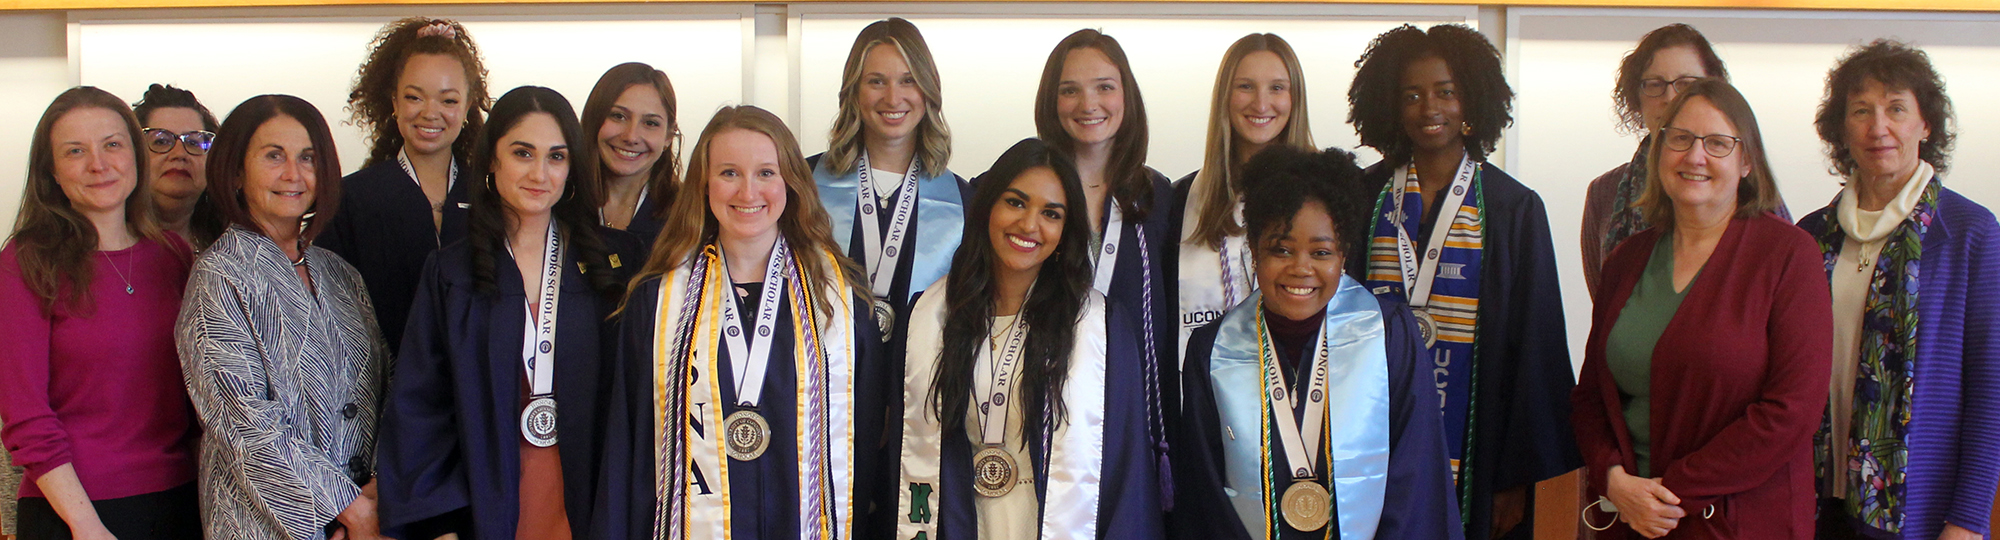 Class of 2022 Honors Program graduates pose with their faculty advisors